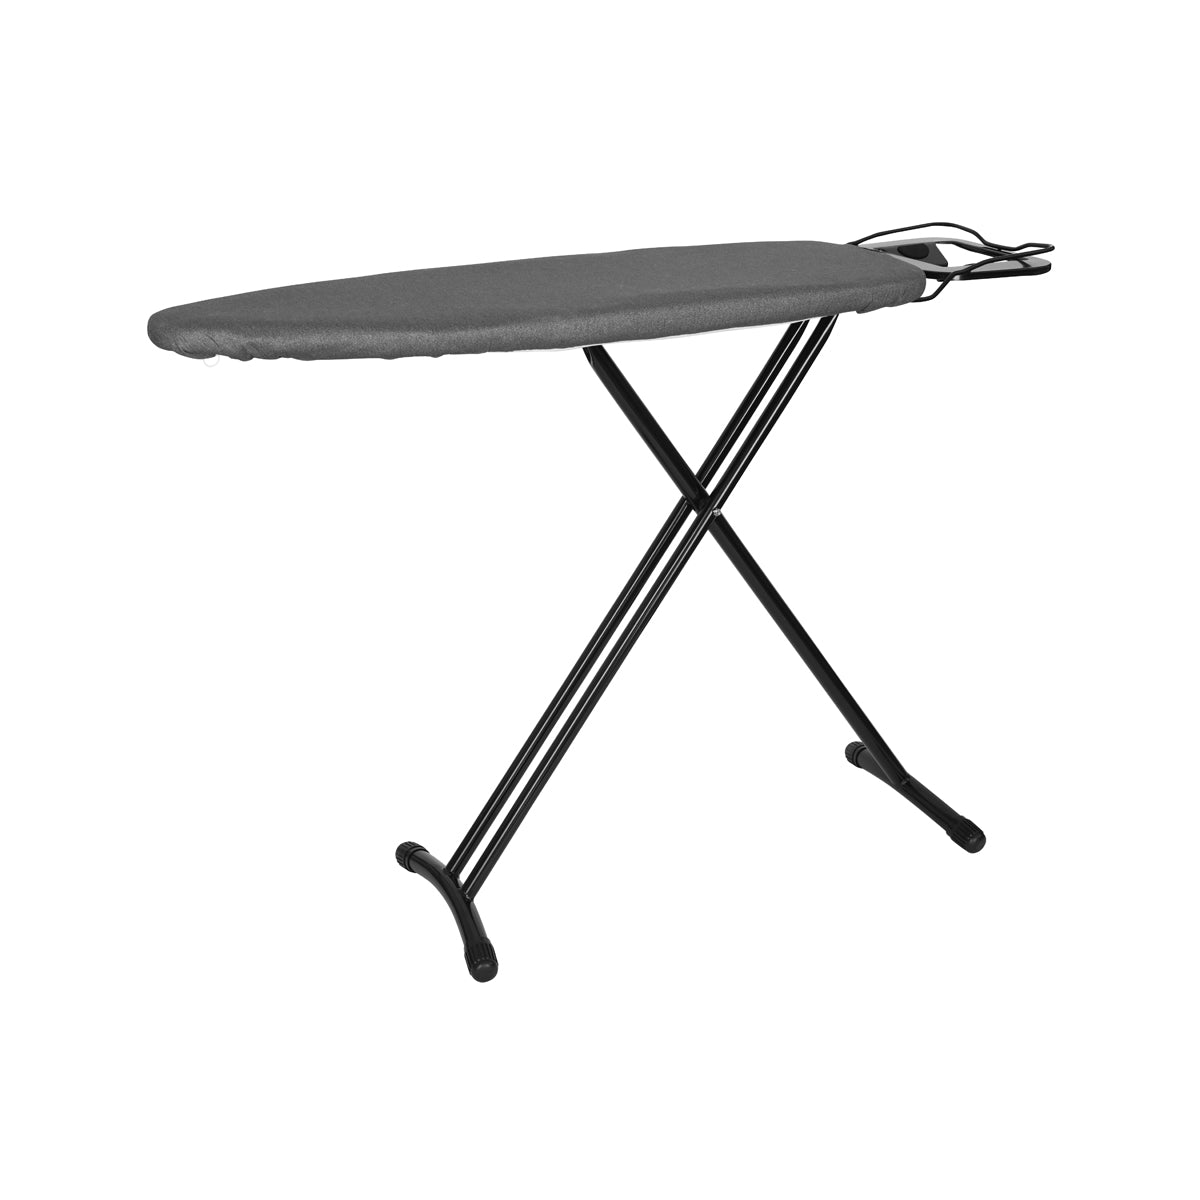 9000-19 Noble & Price Ironing Board with Iron Rest 915x320x830mm Tomkin Australia Hospitality Supplies